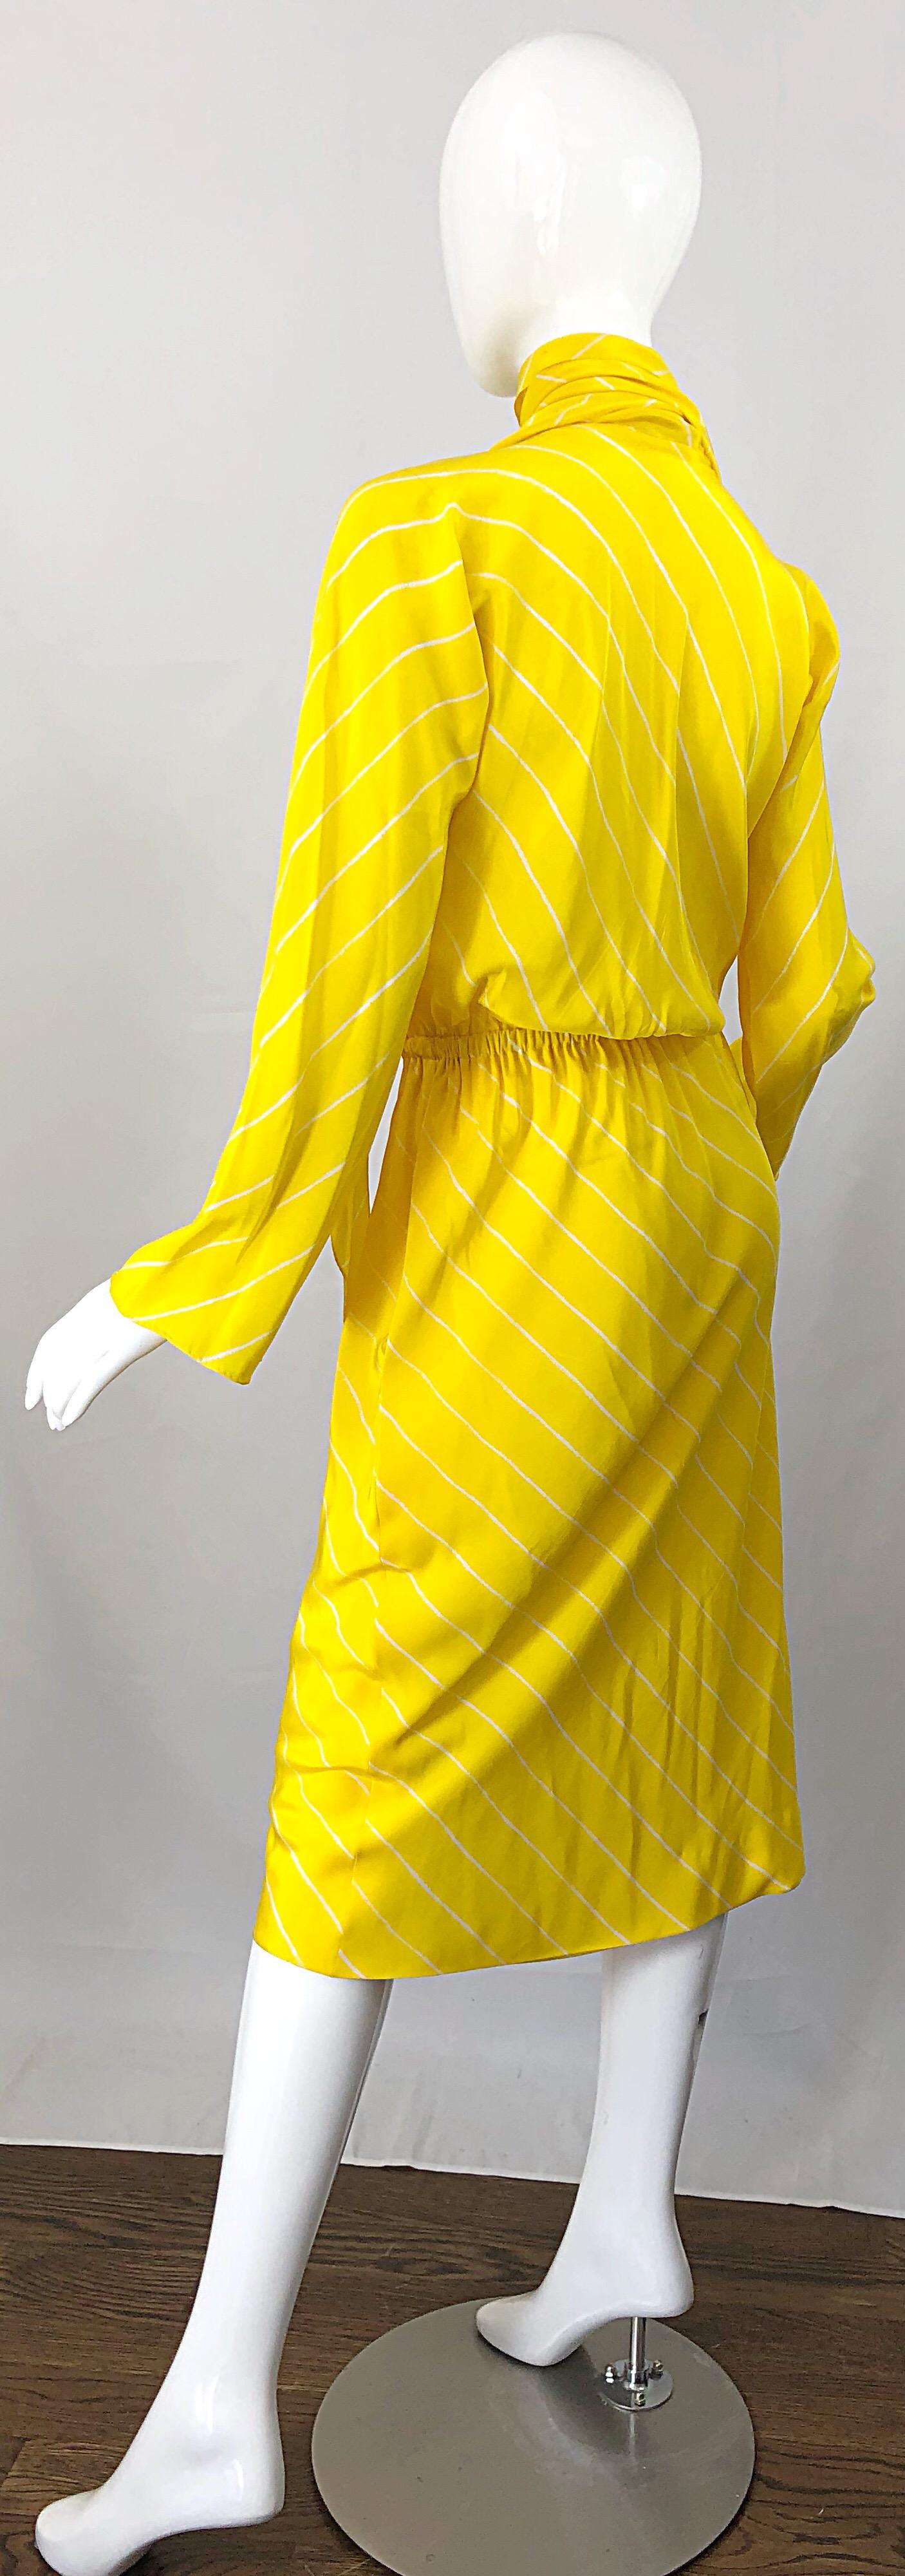 1970s Halston Canary Yellow + White Chevron Striped Bell Sleeve 70s Scarf Dress 6